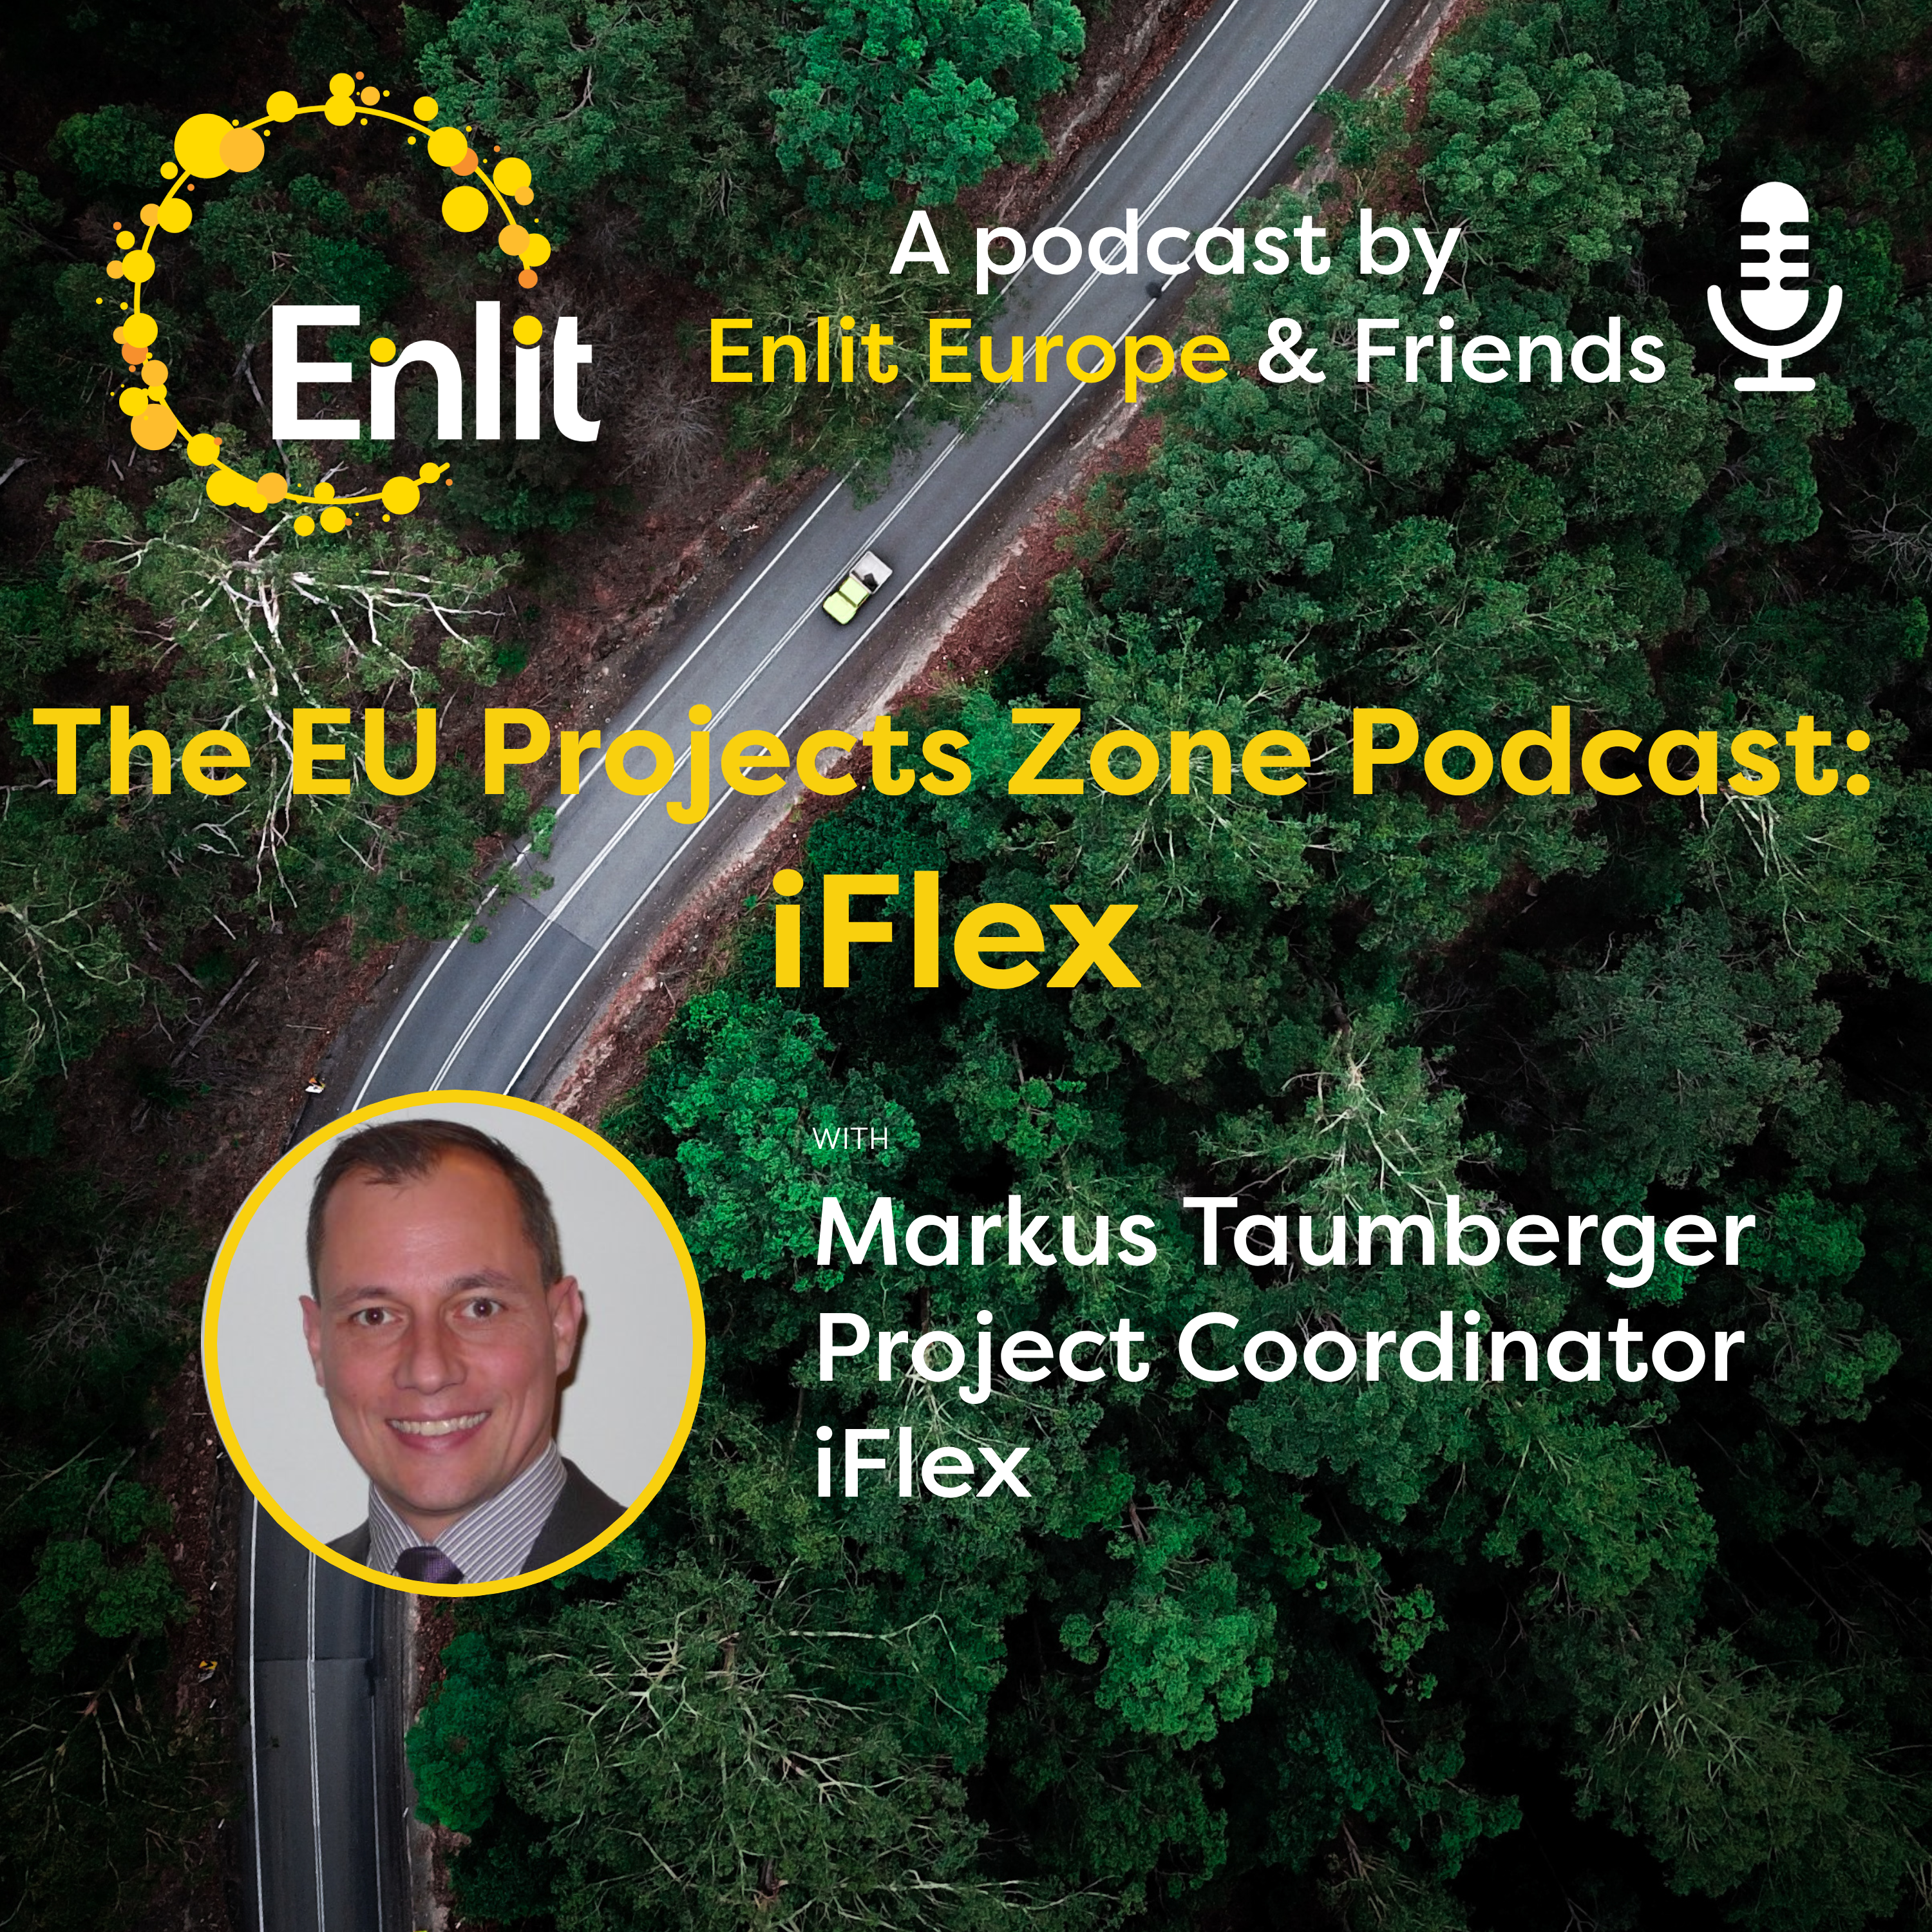 The EU Projects Zone Podcast: iFLEX with Markus Taumberger